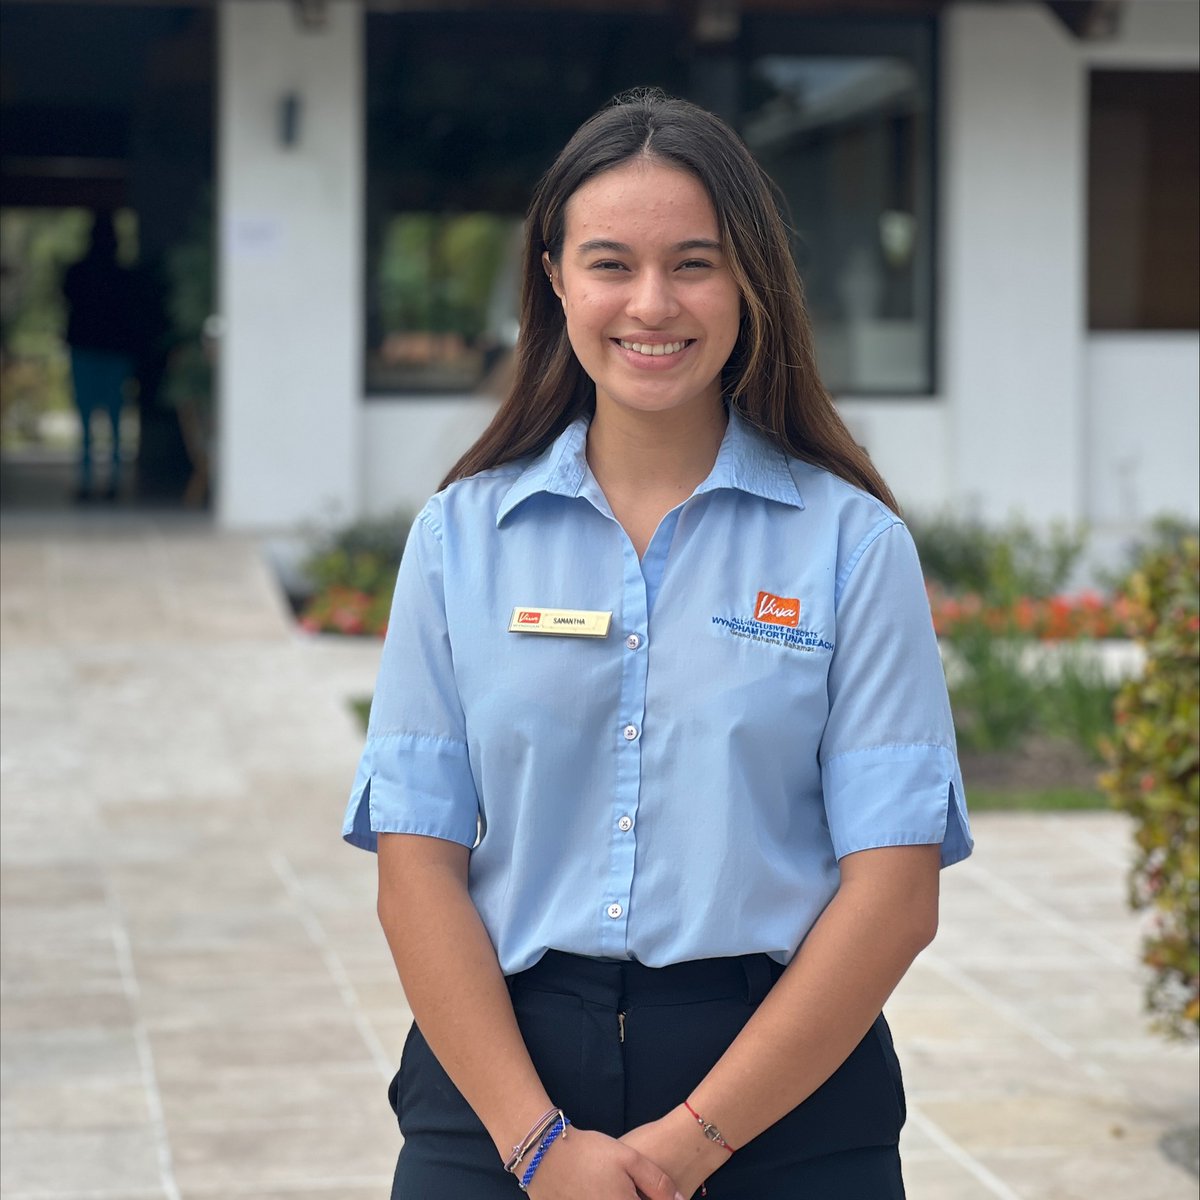 Say hello to Samantha Andrade Alvarez, our amazing Guest Service Agent at #VivaFortunaBeach by Wyndham! Bringing joy to your stay, one smile at a time! 😊🌴 #OnlyAtViva #VivaResorts